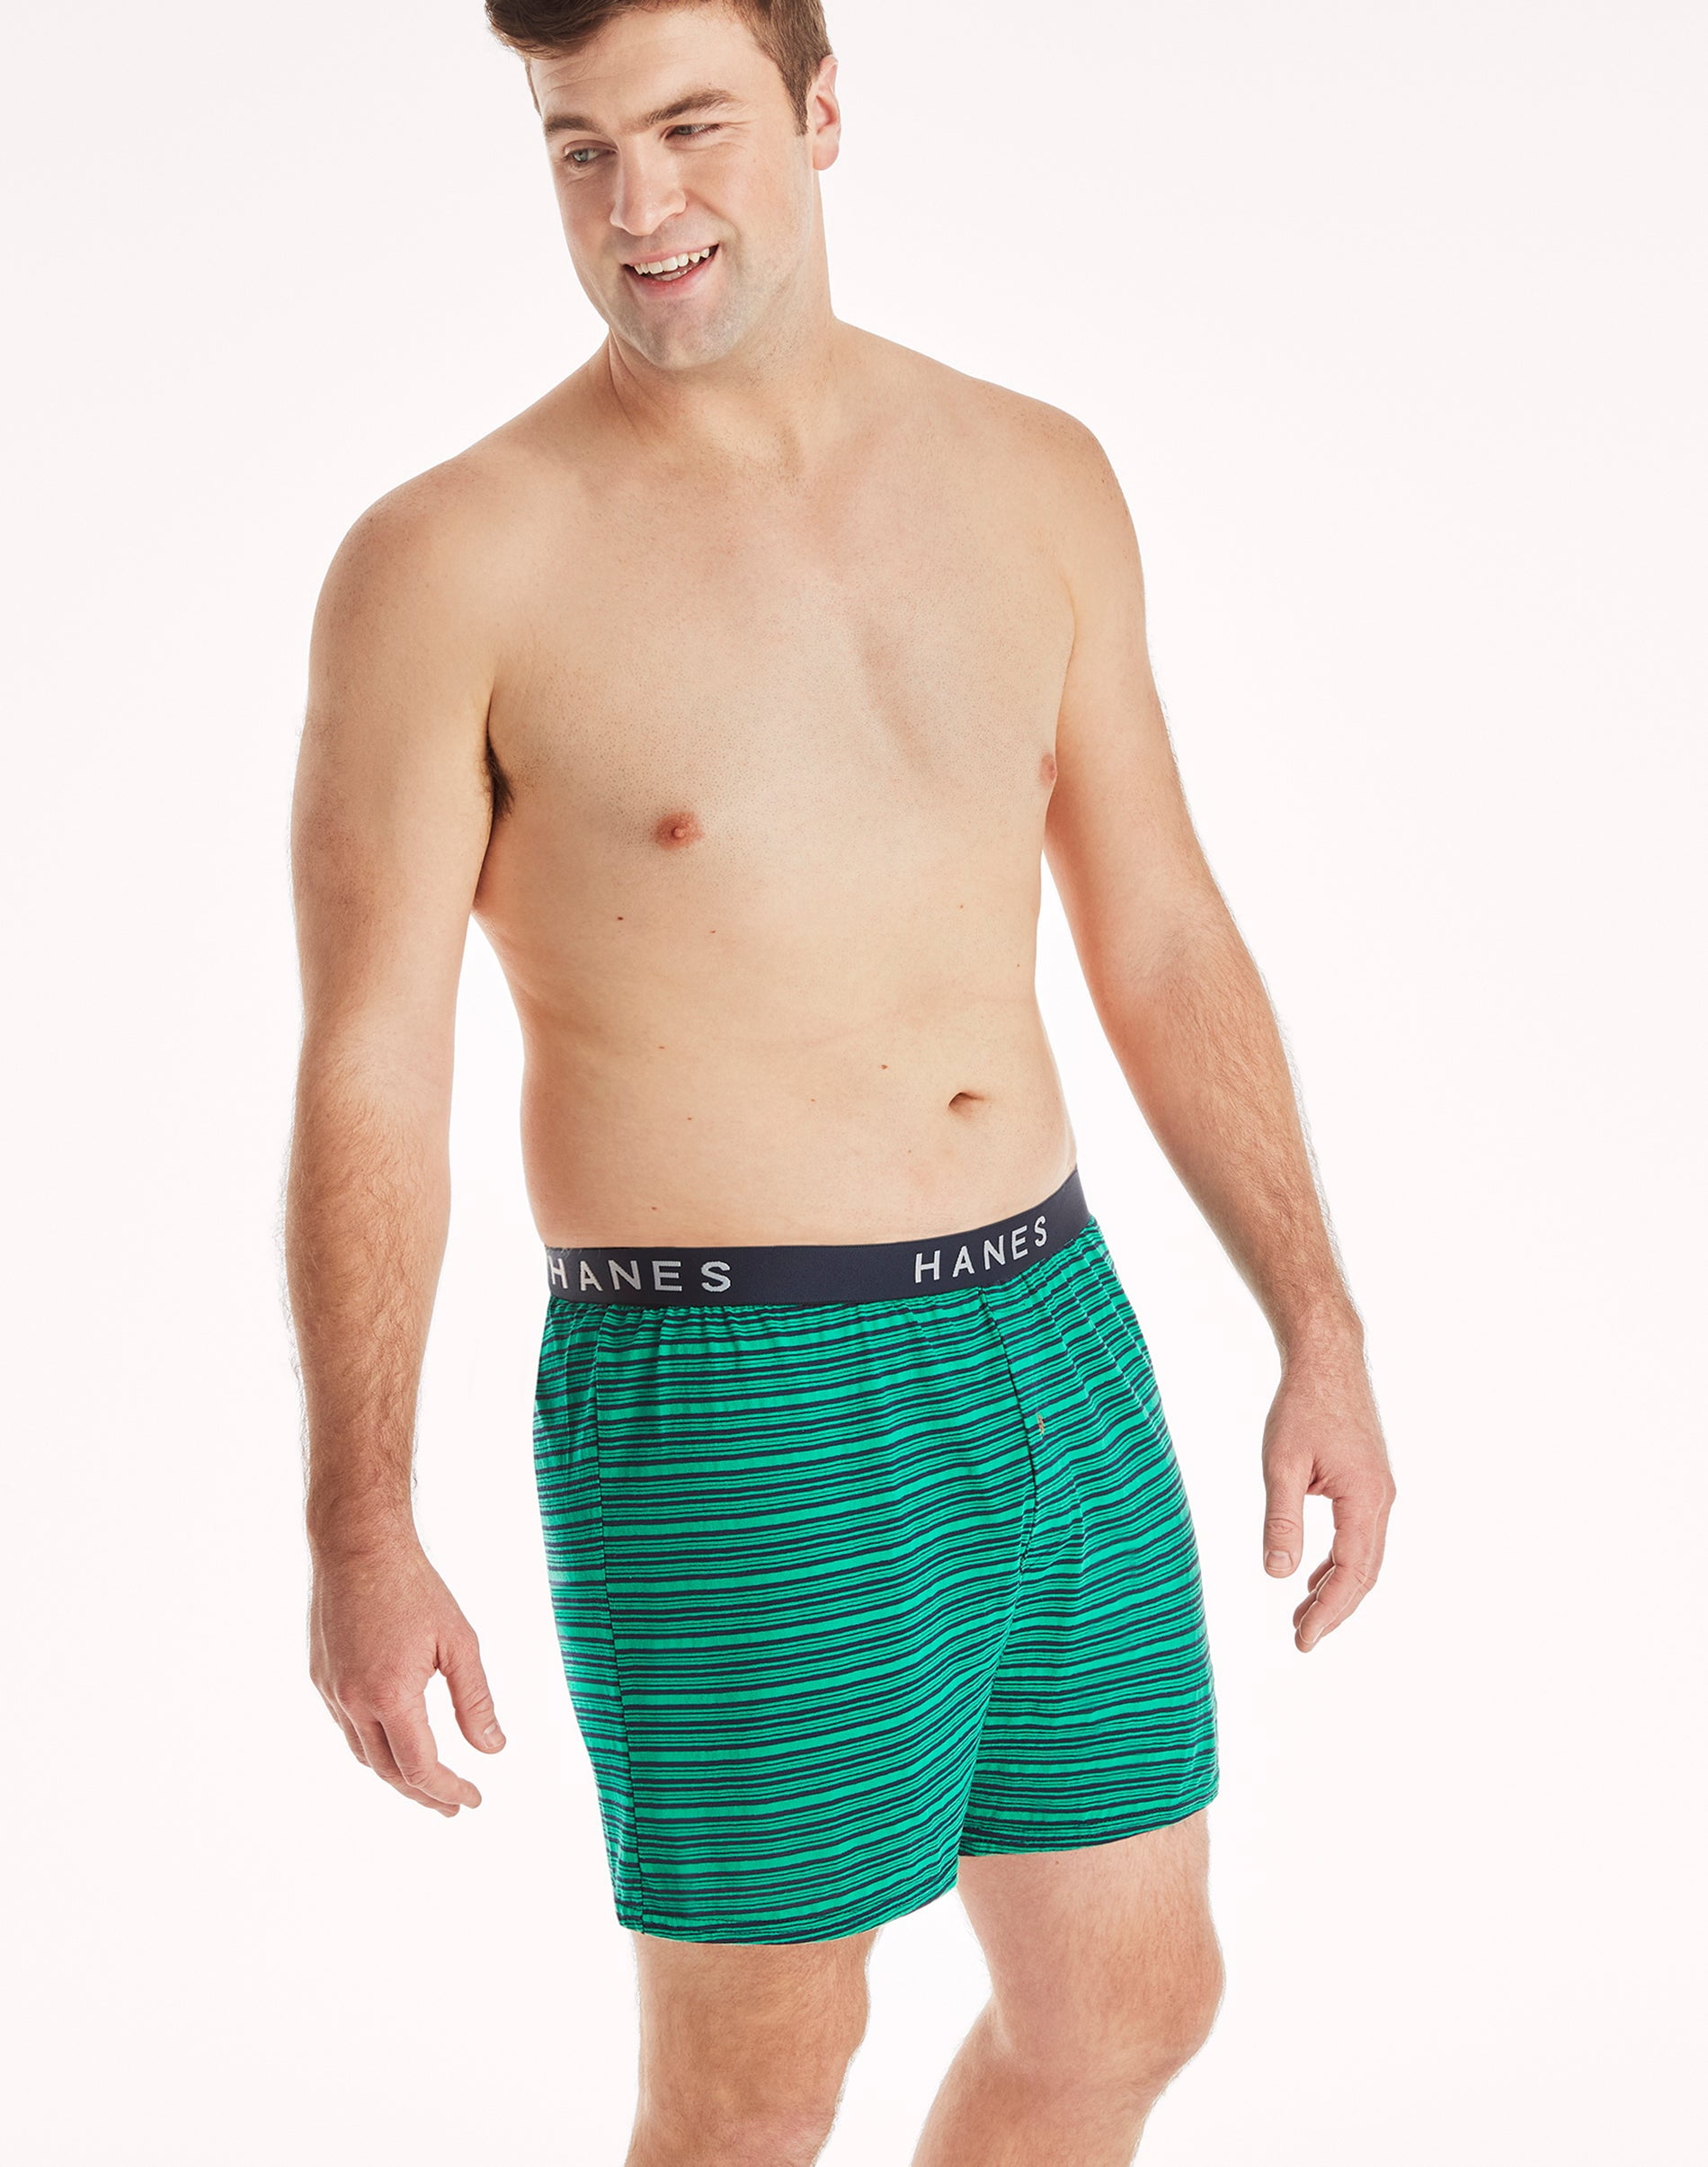 Classics TAGLESS ComfortSoft Knit Boxers with Comfort Flex Waistband 5-Pack  